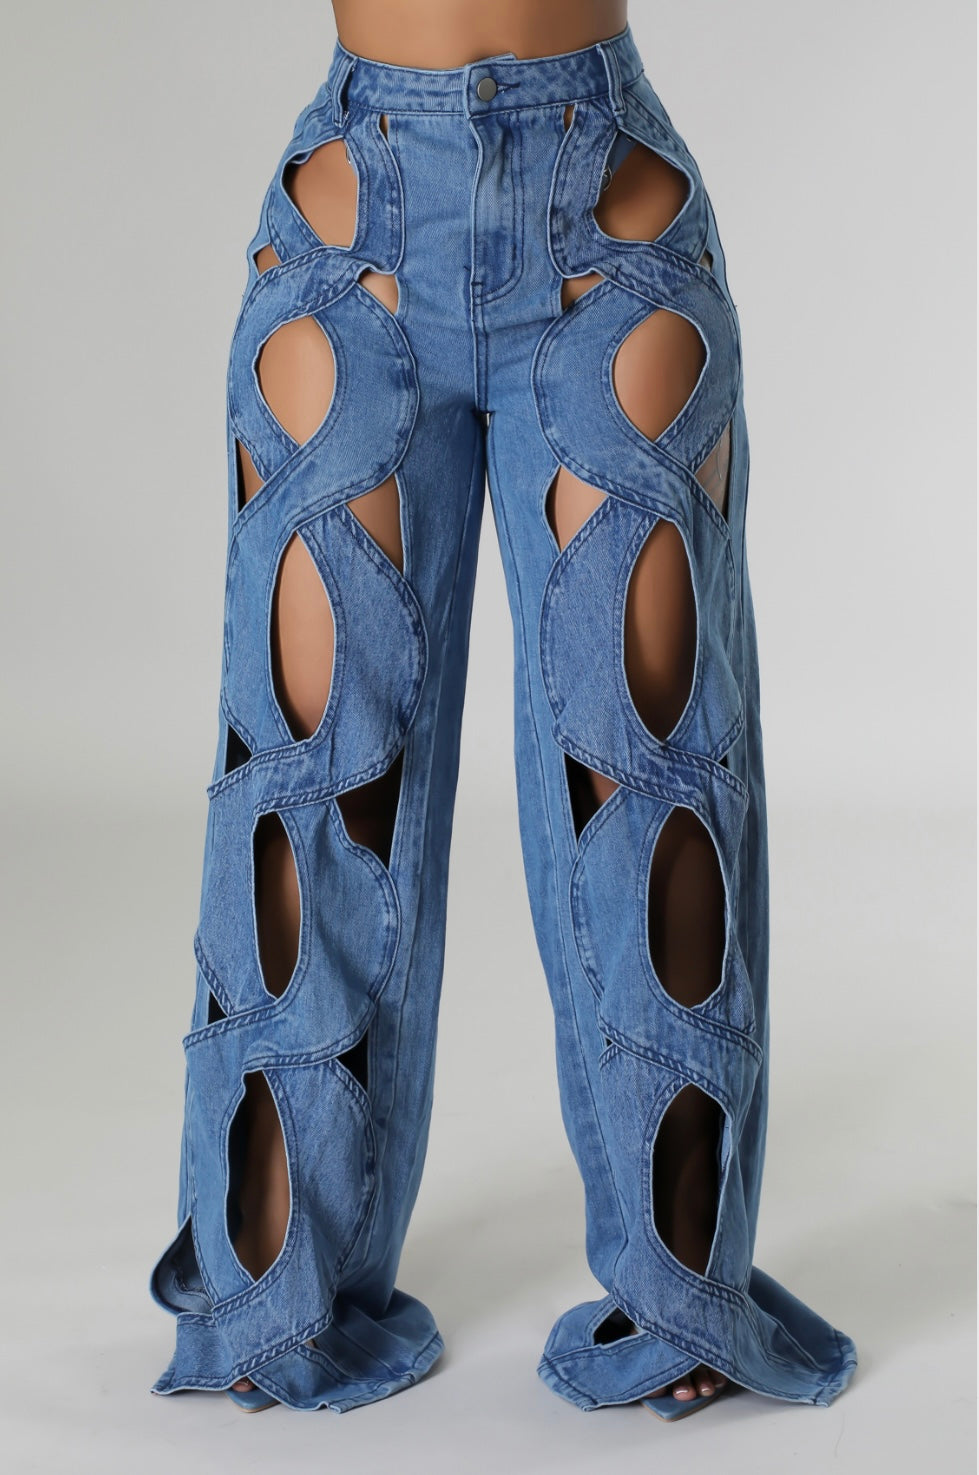 Pretty Hole in One Denim Jeans